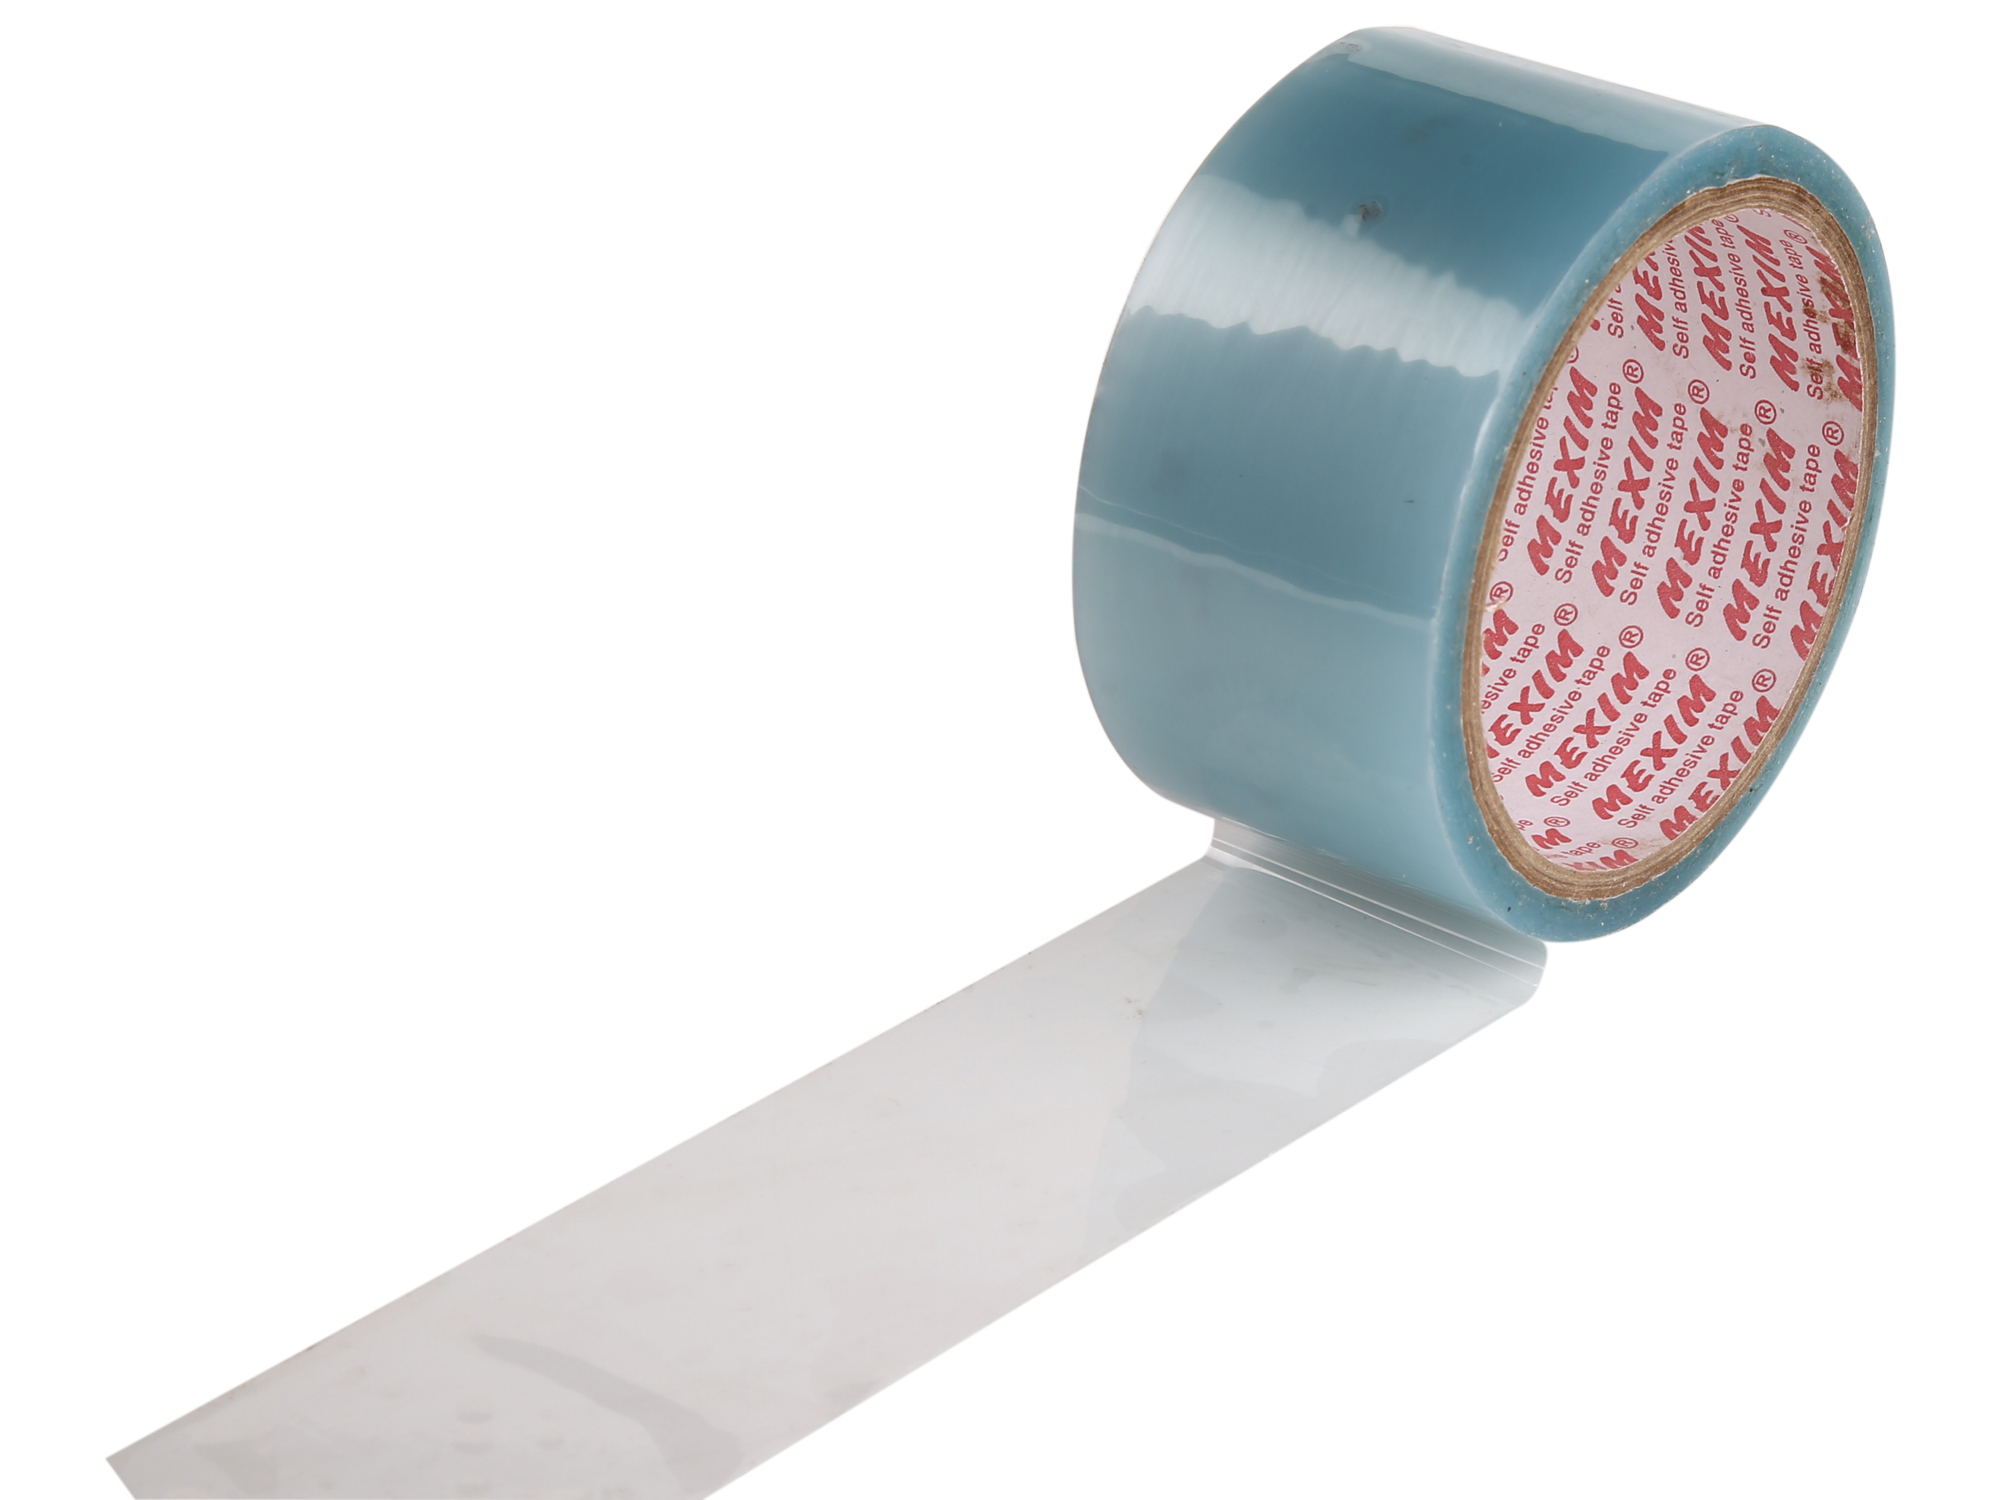 Heavy Duty Polyester Packaging Tape